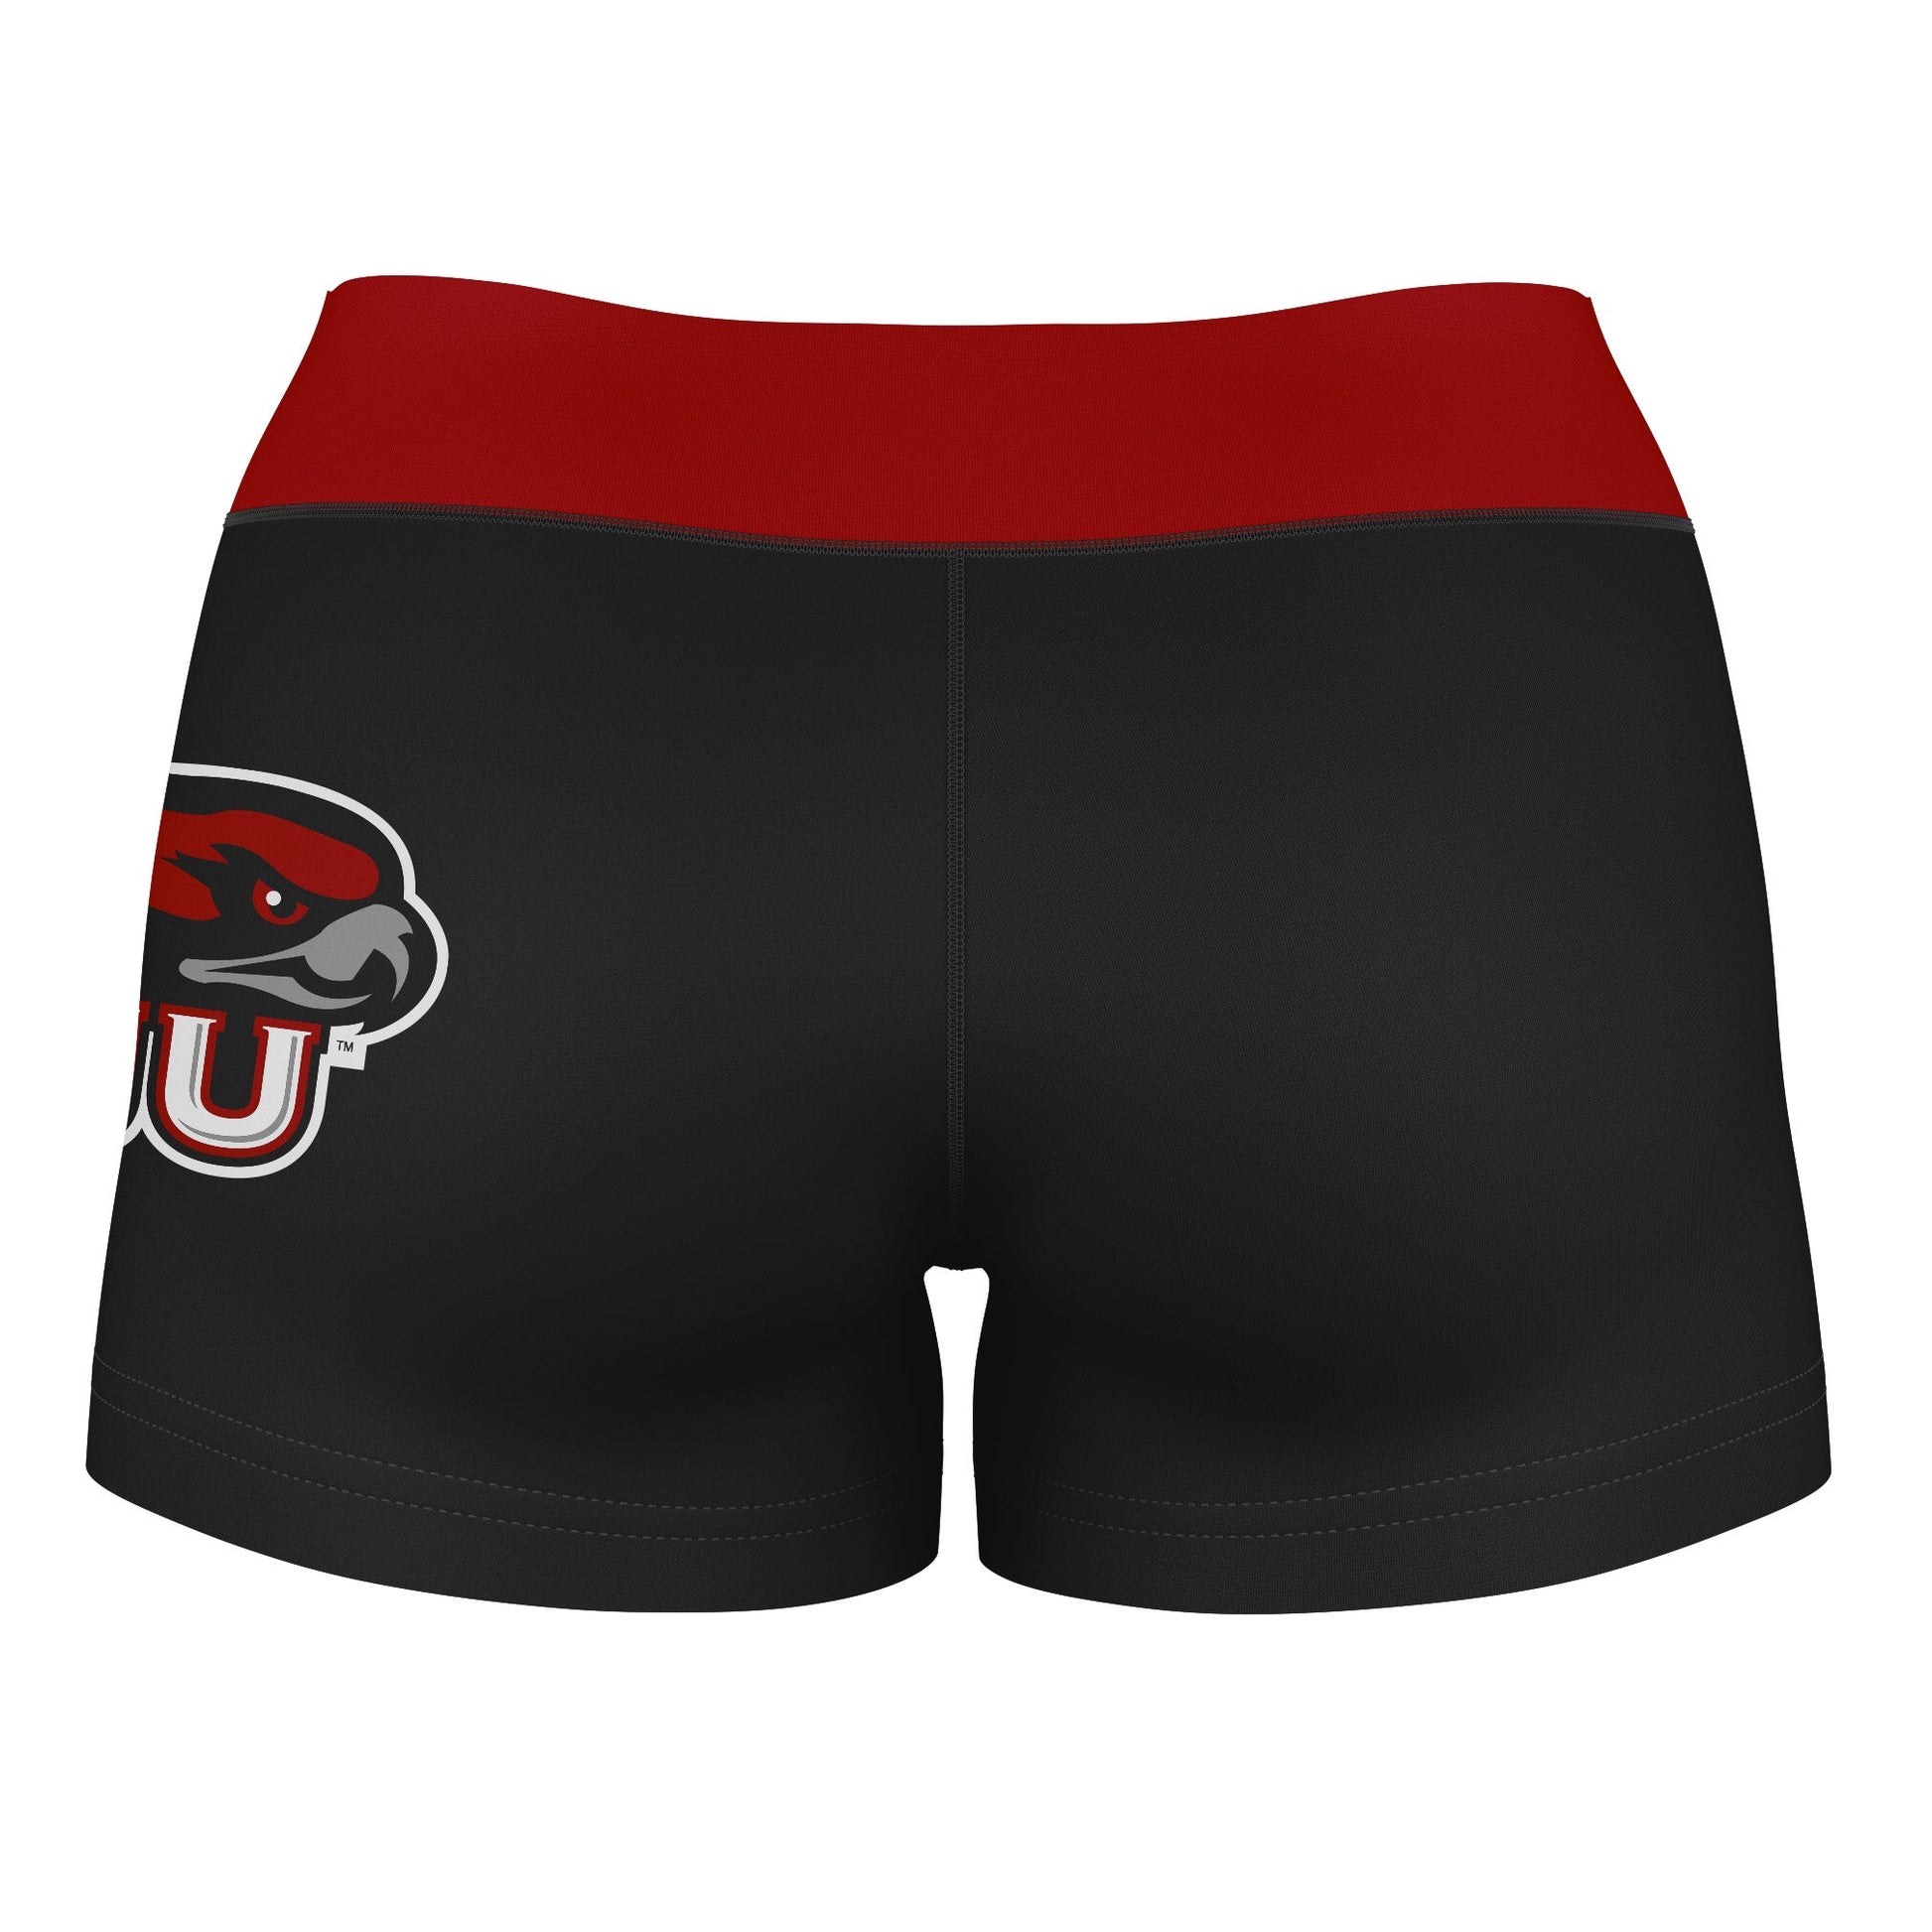 SJU Hawks Vive La Fete Game Day Logo on Thigh and Waistband Black and Red Women Yoga Booty Workout Shorts 3.75 Inseam" - Vive La F̻te - Online Apparel Store